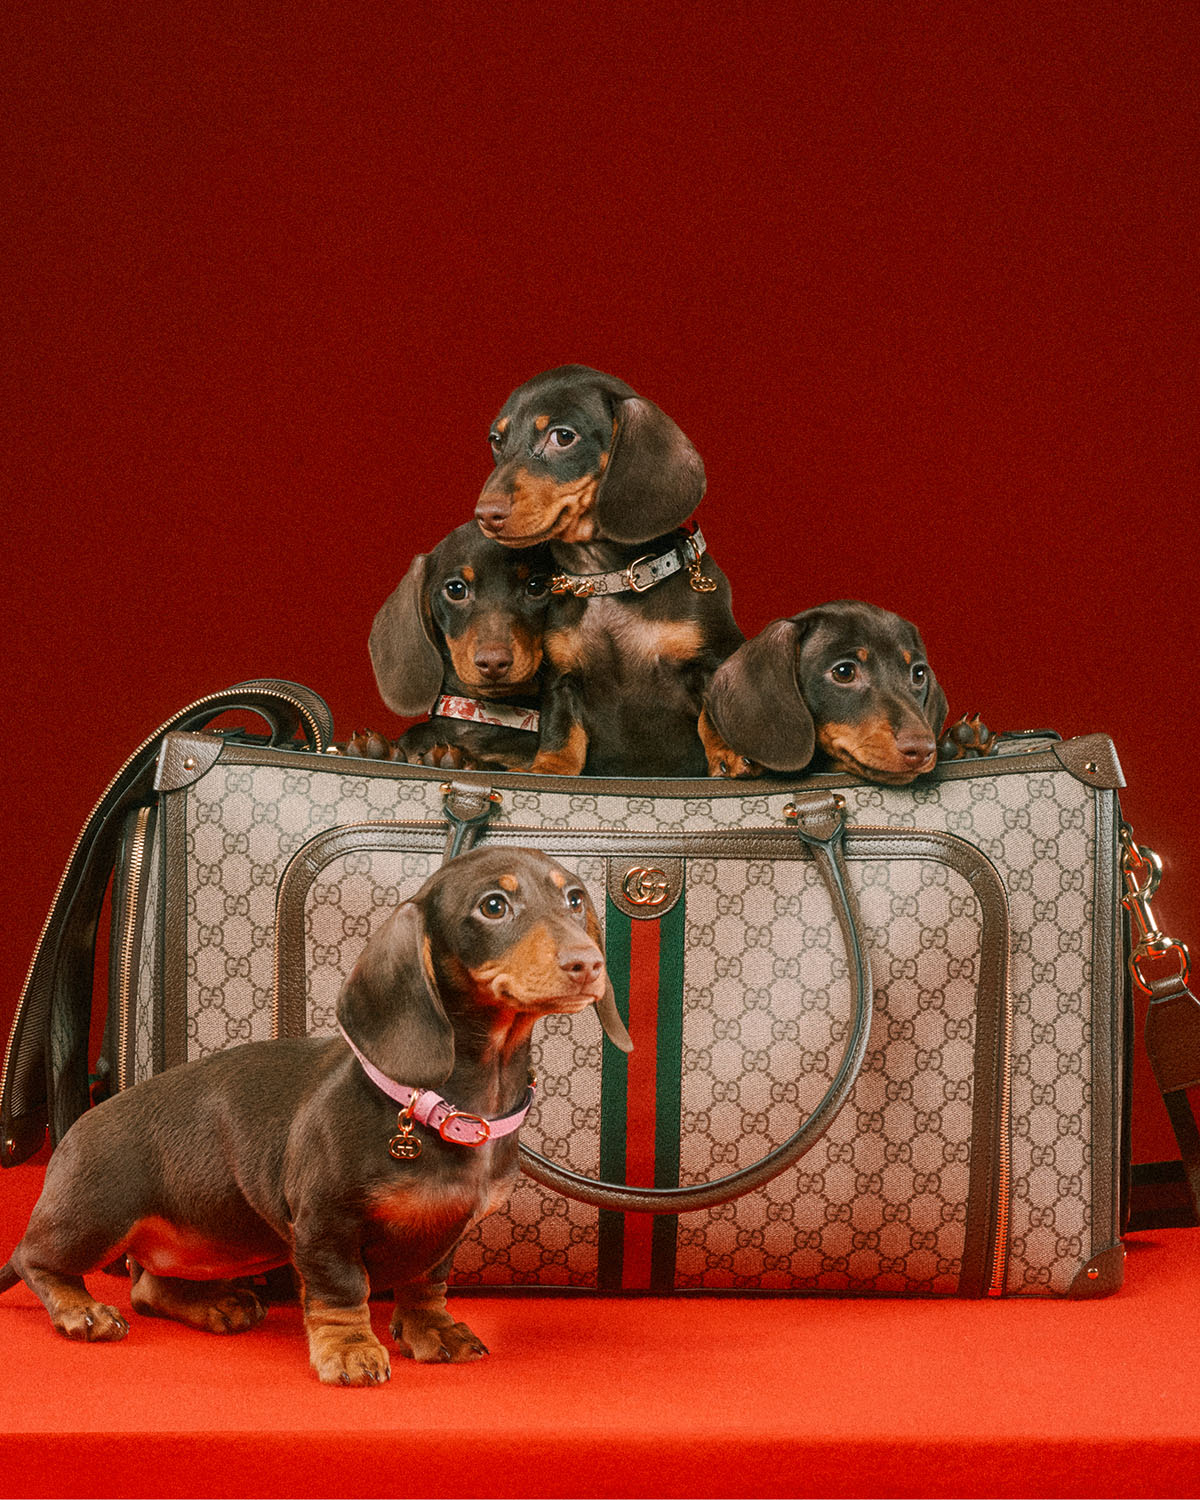 Fab find: Gucci bag a stylish way to carry pets